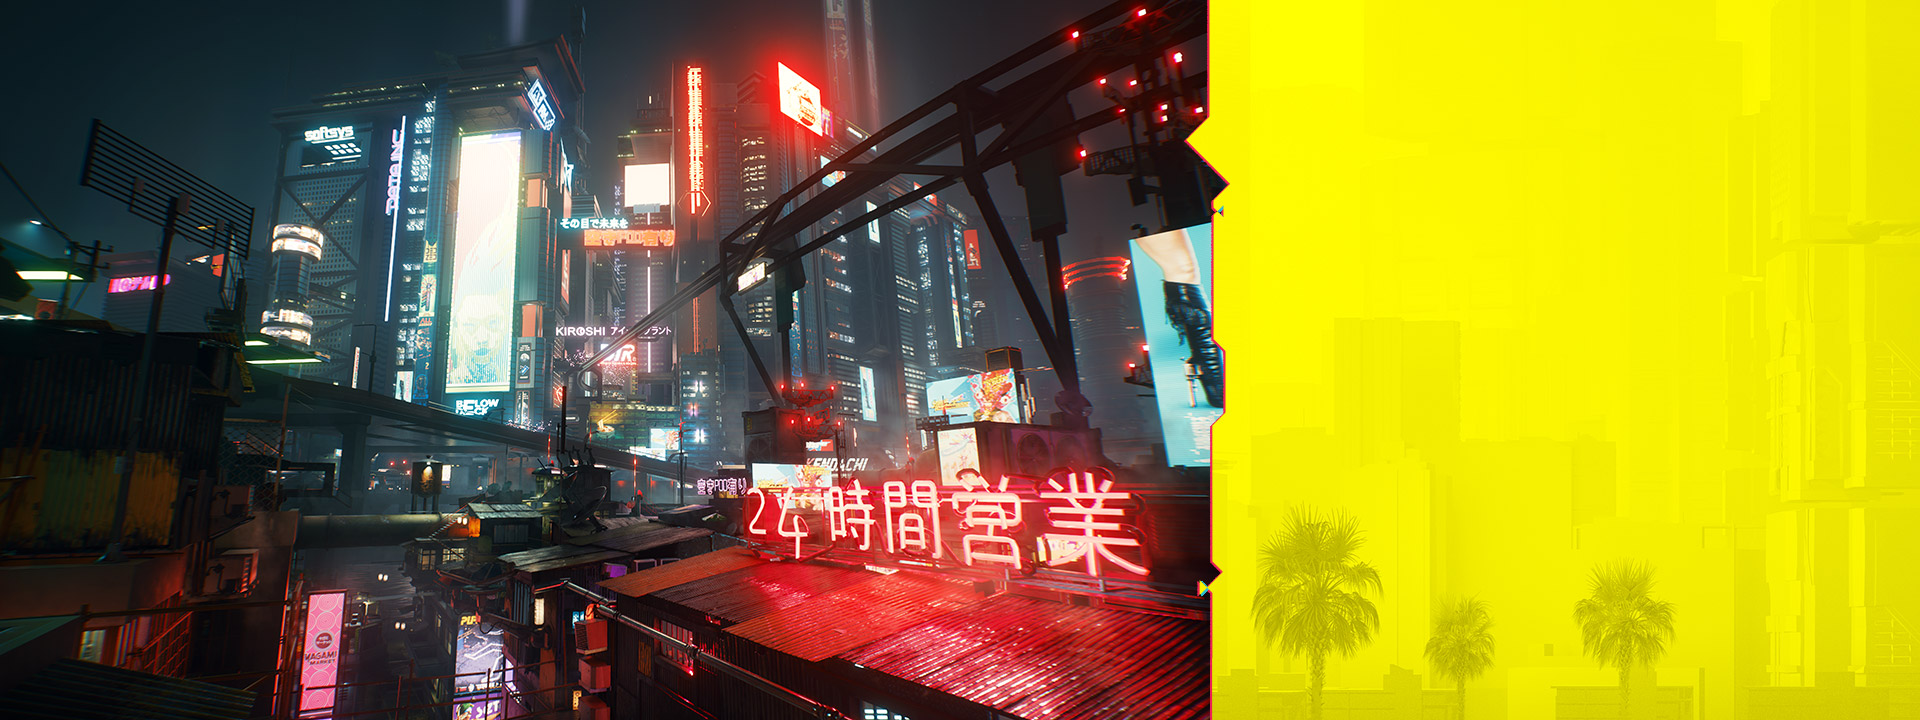 Neon signs in Night City glow against a hazy cityscape at night.